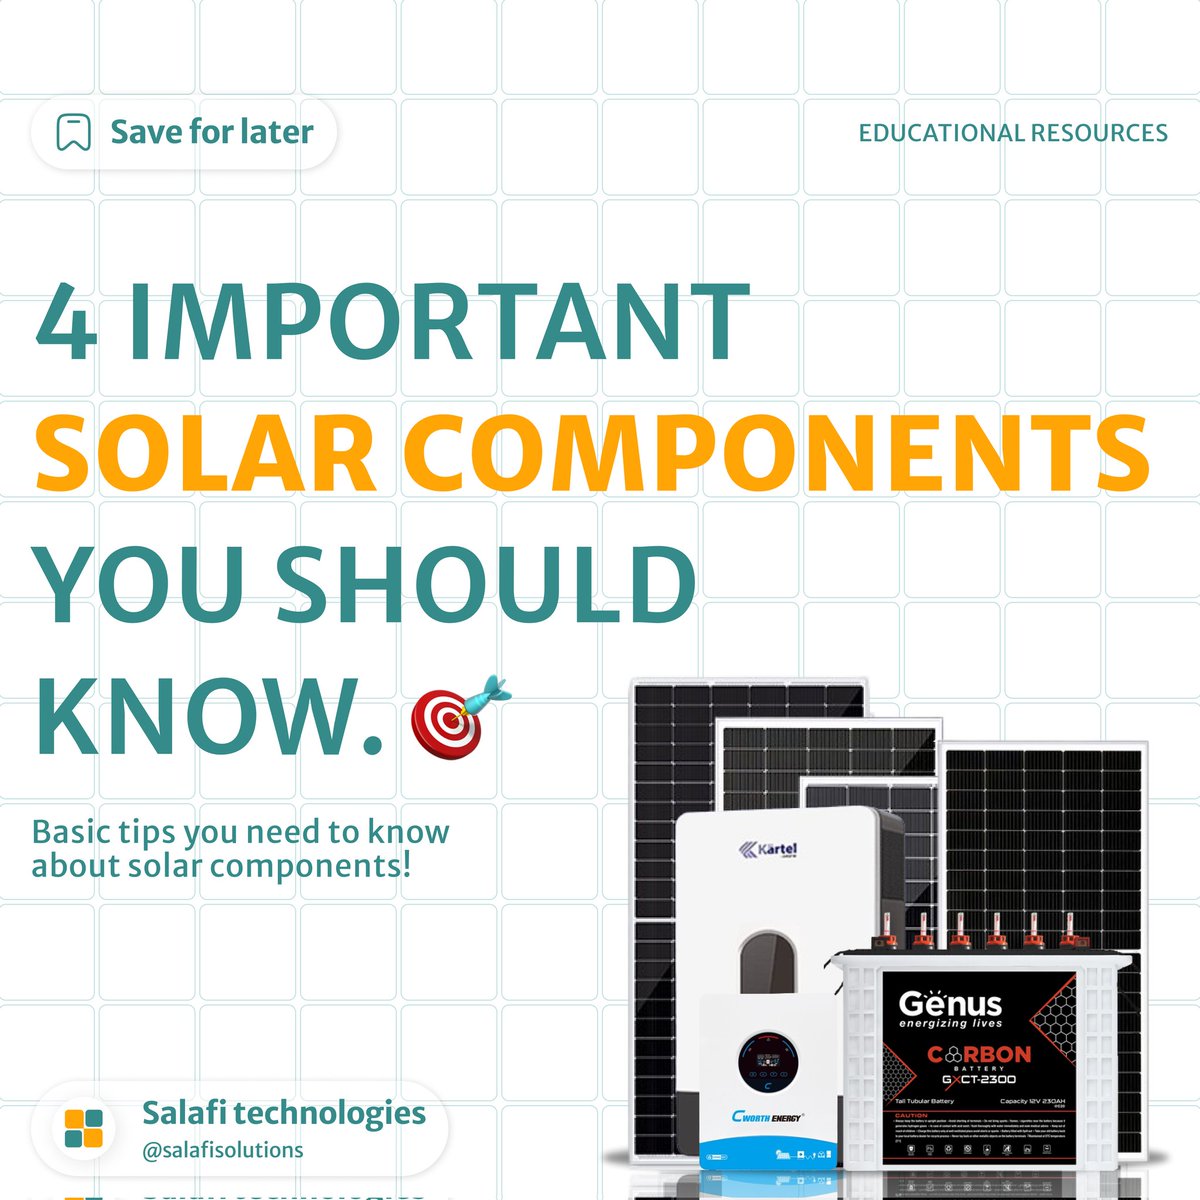 Here are four essential solar components you should know, along with brief descriptions of their functions. #salafitechnologies #solarsystem #SolarPower

Thread 🧵